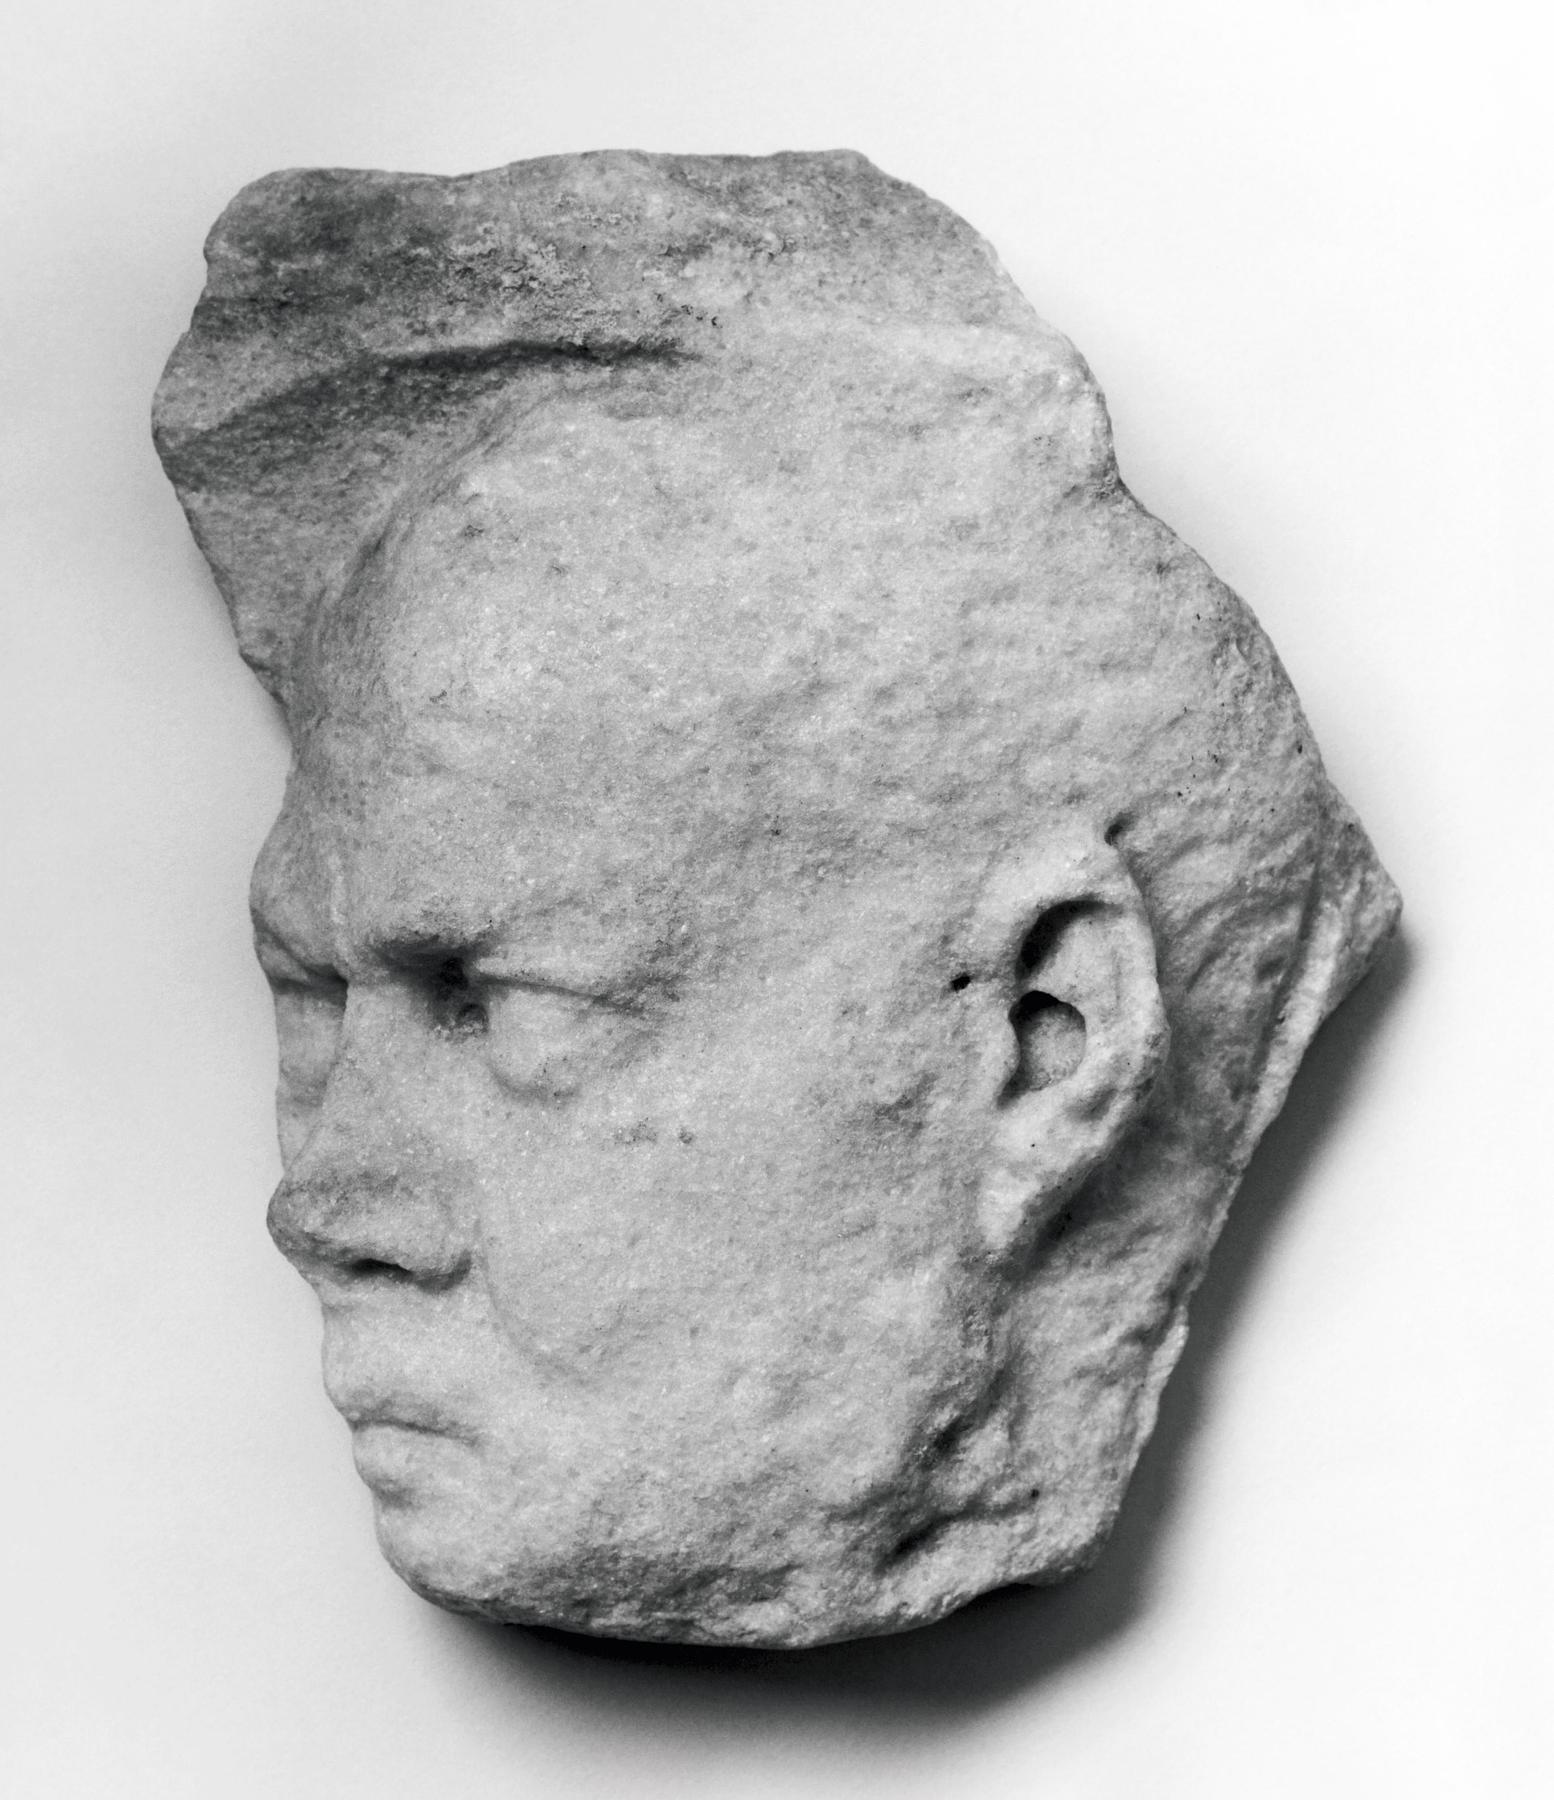 Sarcophagus relief with a man's head, H1491